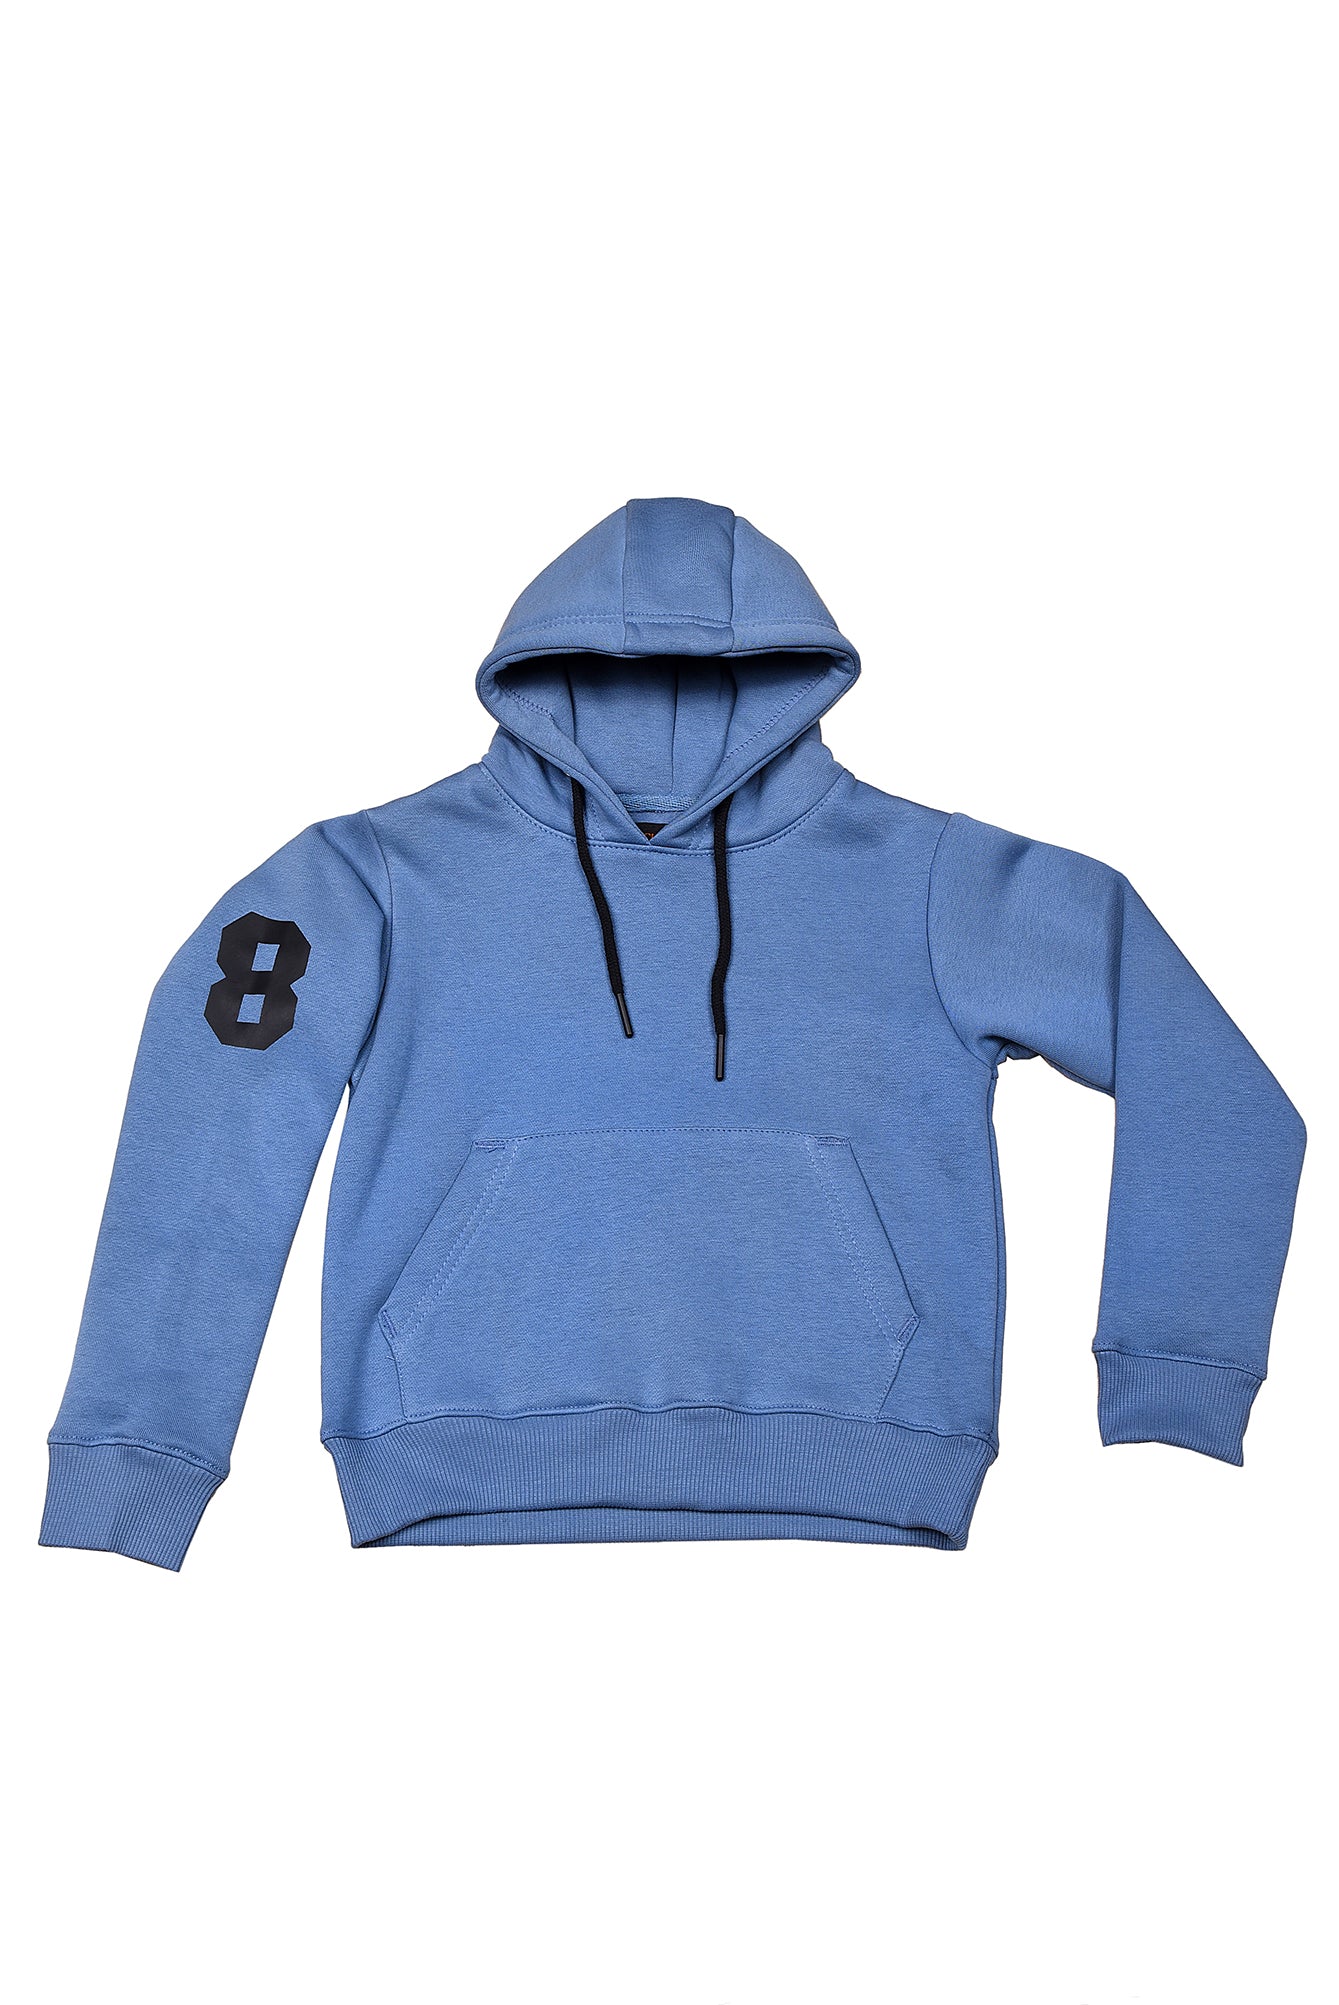 KDS-BC-13127 PULL OVER HOODIE BLUE